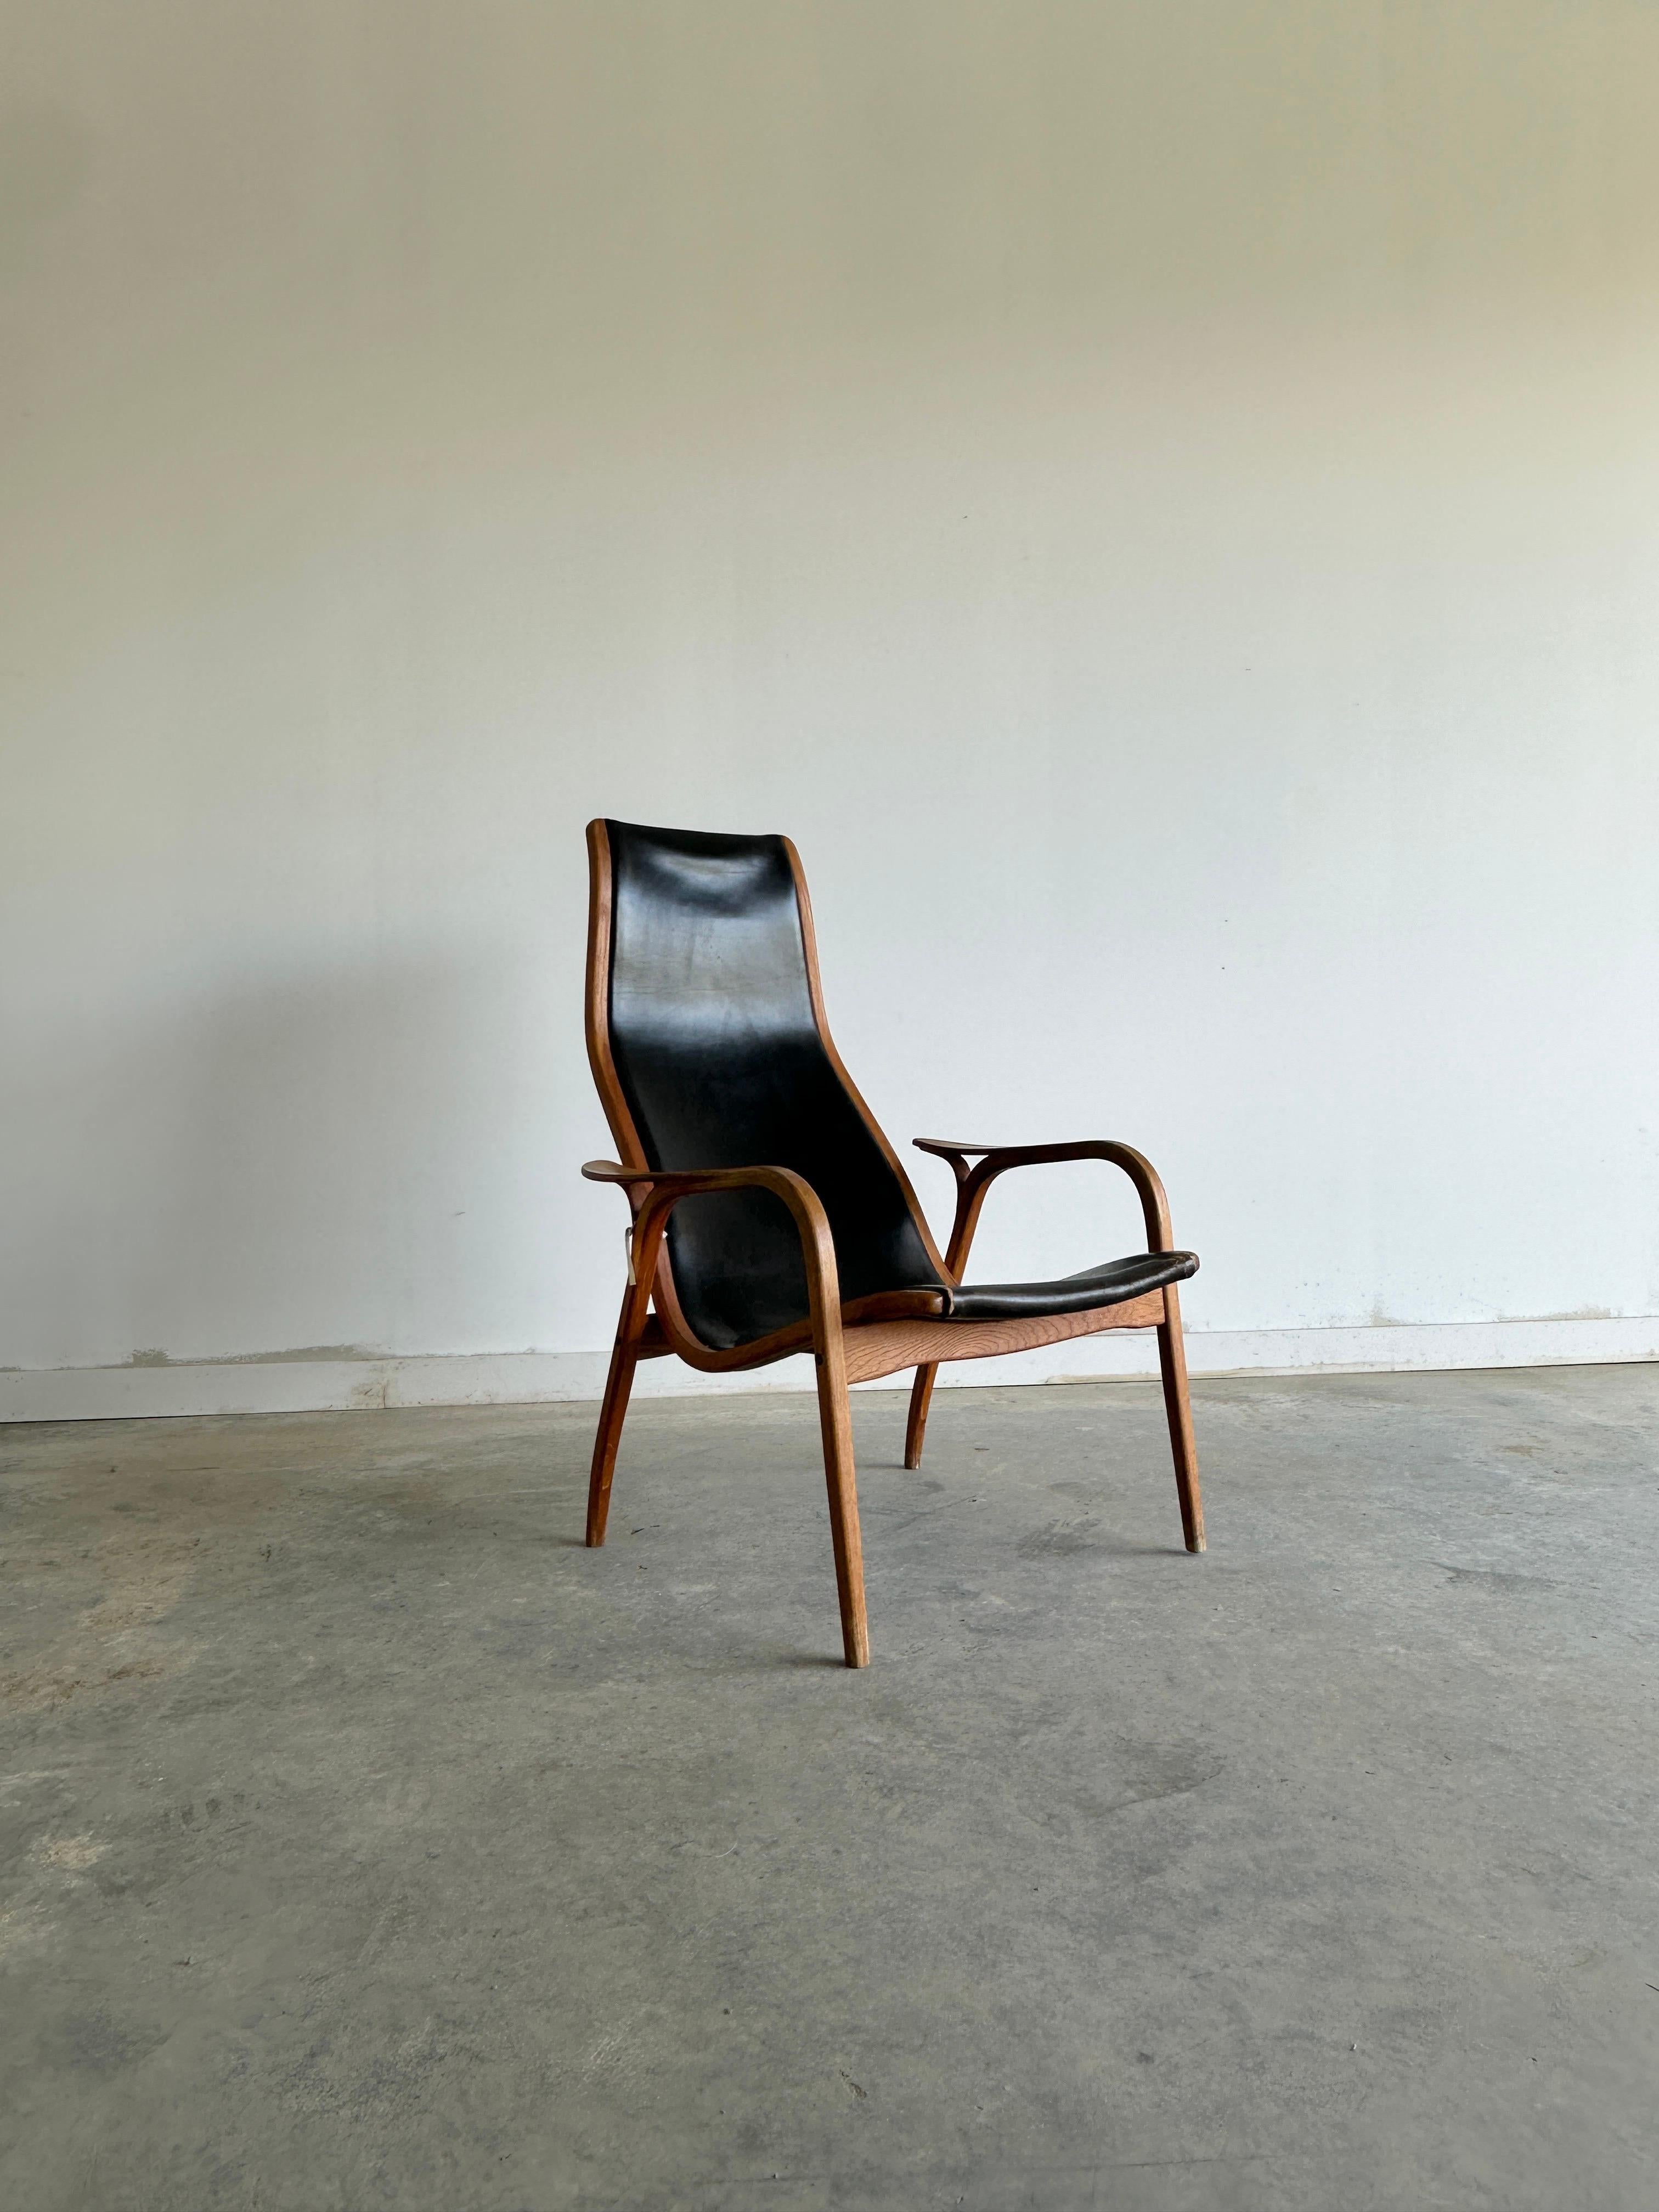 The Lamino chair by Yngve Ekström for Swedese is a classic piece of Scandinavian design that combines simplicity, comfort and elegance. The chair has a curved wooden frame that supports an original black leather seat and backrest. The Lamino chair